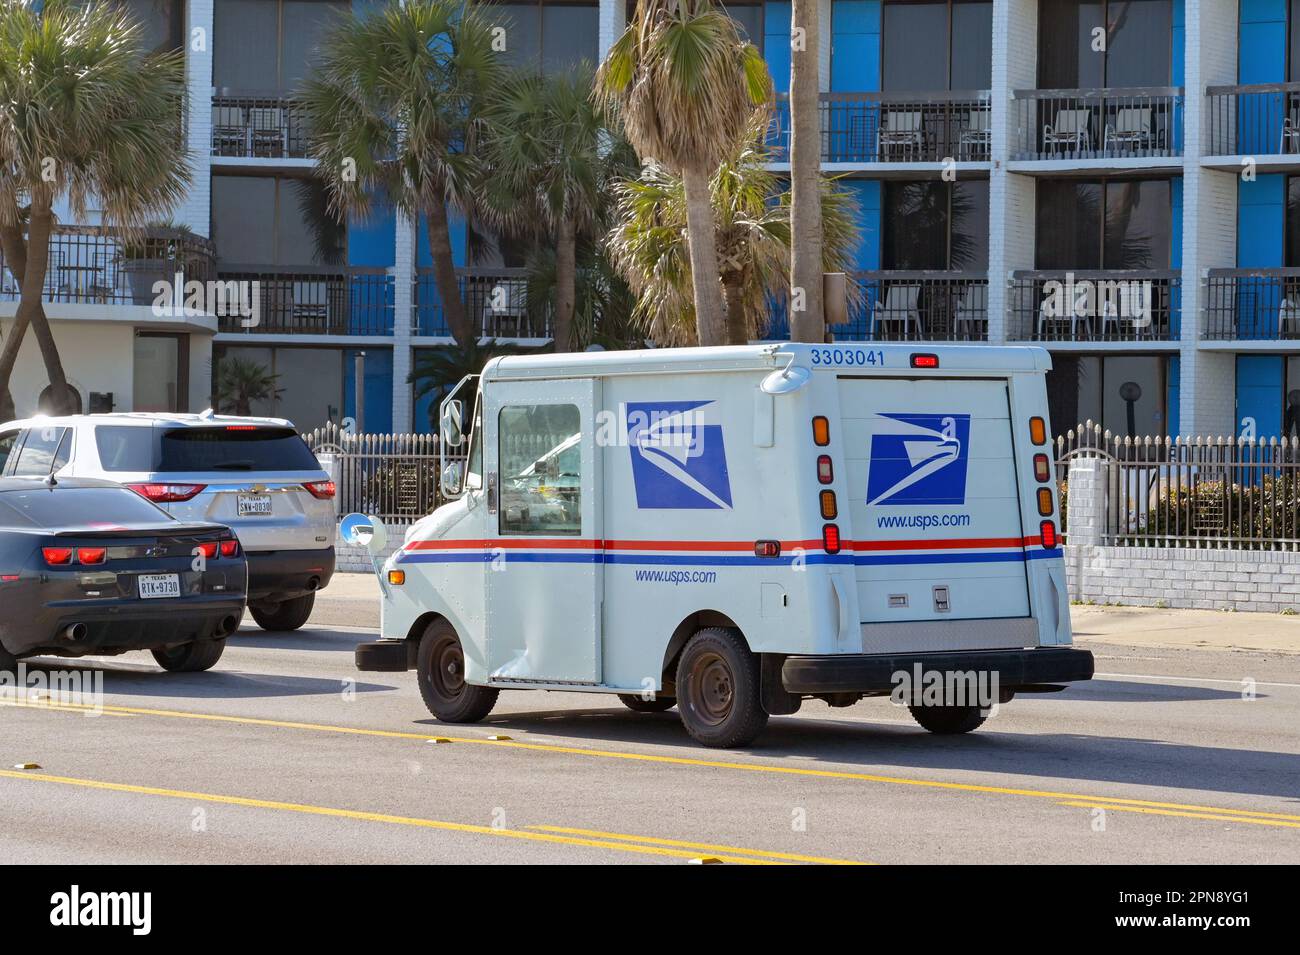 Galveston, Texas, USA - February 2023: Small truck used by the United States Postal Service driving on one of the city's streets. Stock Photo